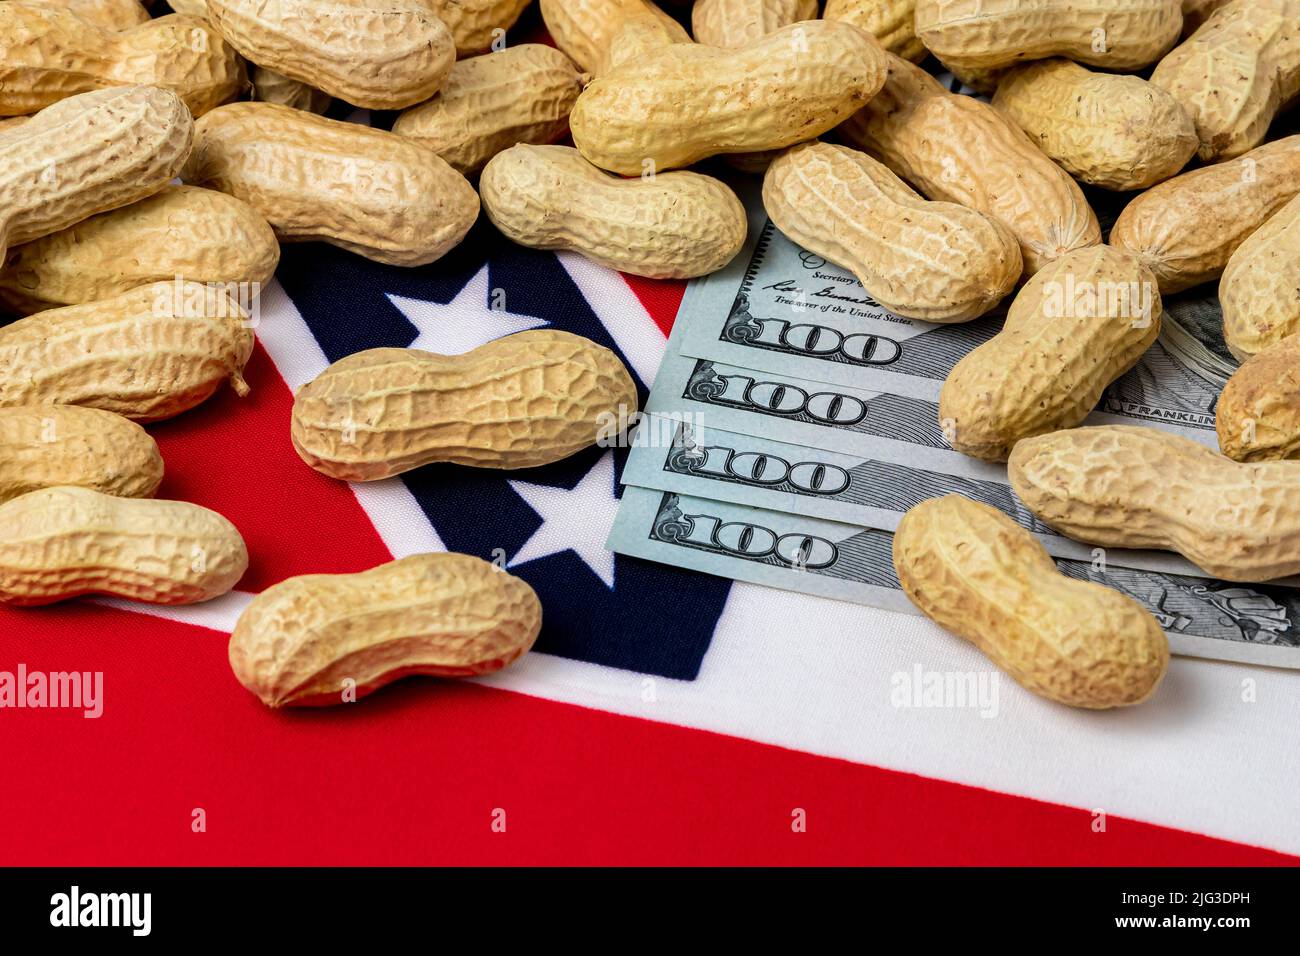 Peanuts in shell on flag of Mississippi with 100 dollar bills. Peanut farming, trade, tariffs and market price concept. Stock Photo